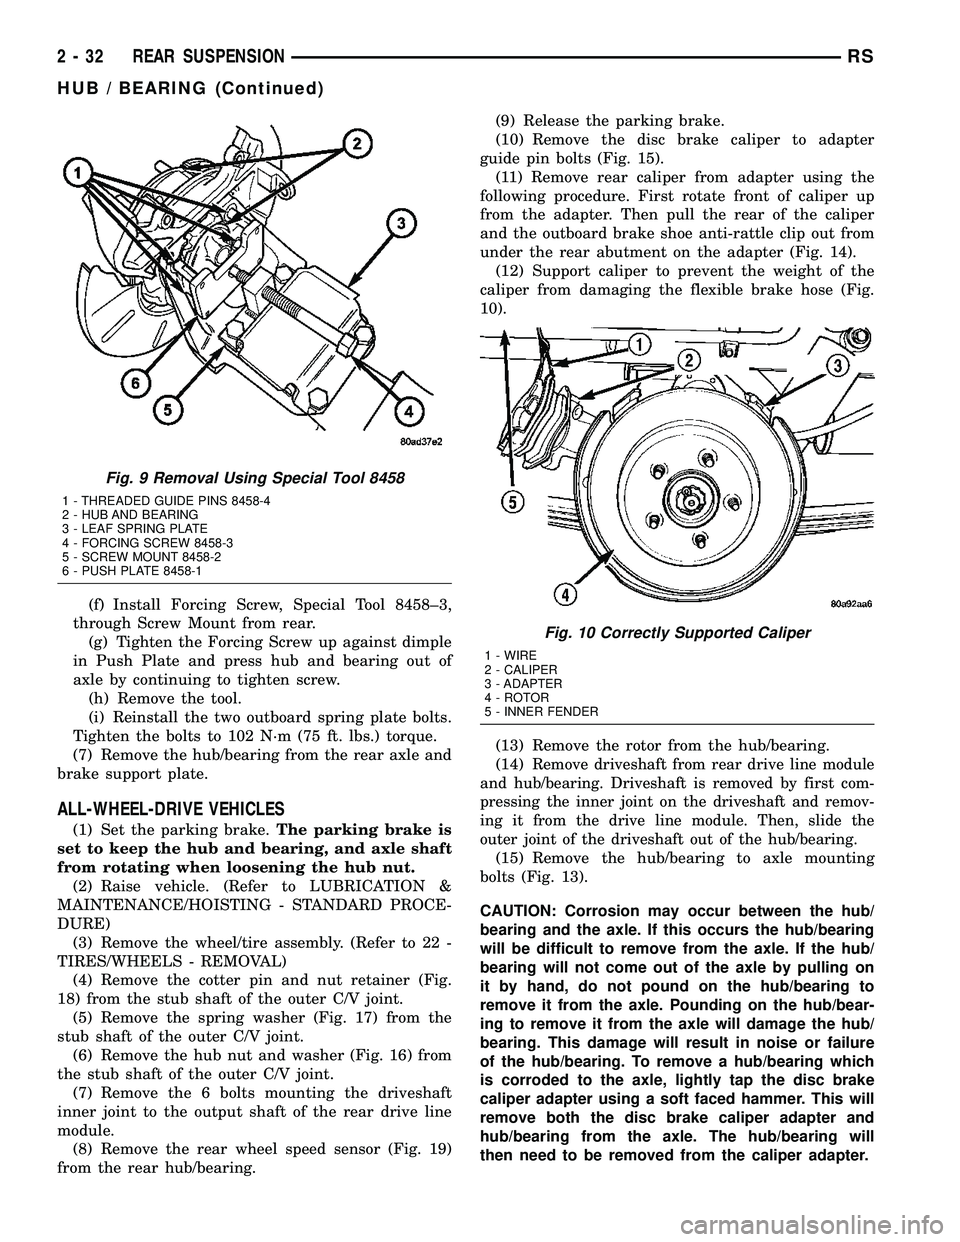 CHRYSLER VOYAGER 2005  Service Manual (f) Install Forcing Screw, Special Tool 8458±3,
through Screw Mount from rear.
(g) Tighten the Forcing Screw up against dimple
in Push Plate and press hub and bearing out of
axle by continuing to tig